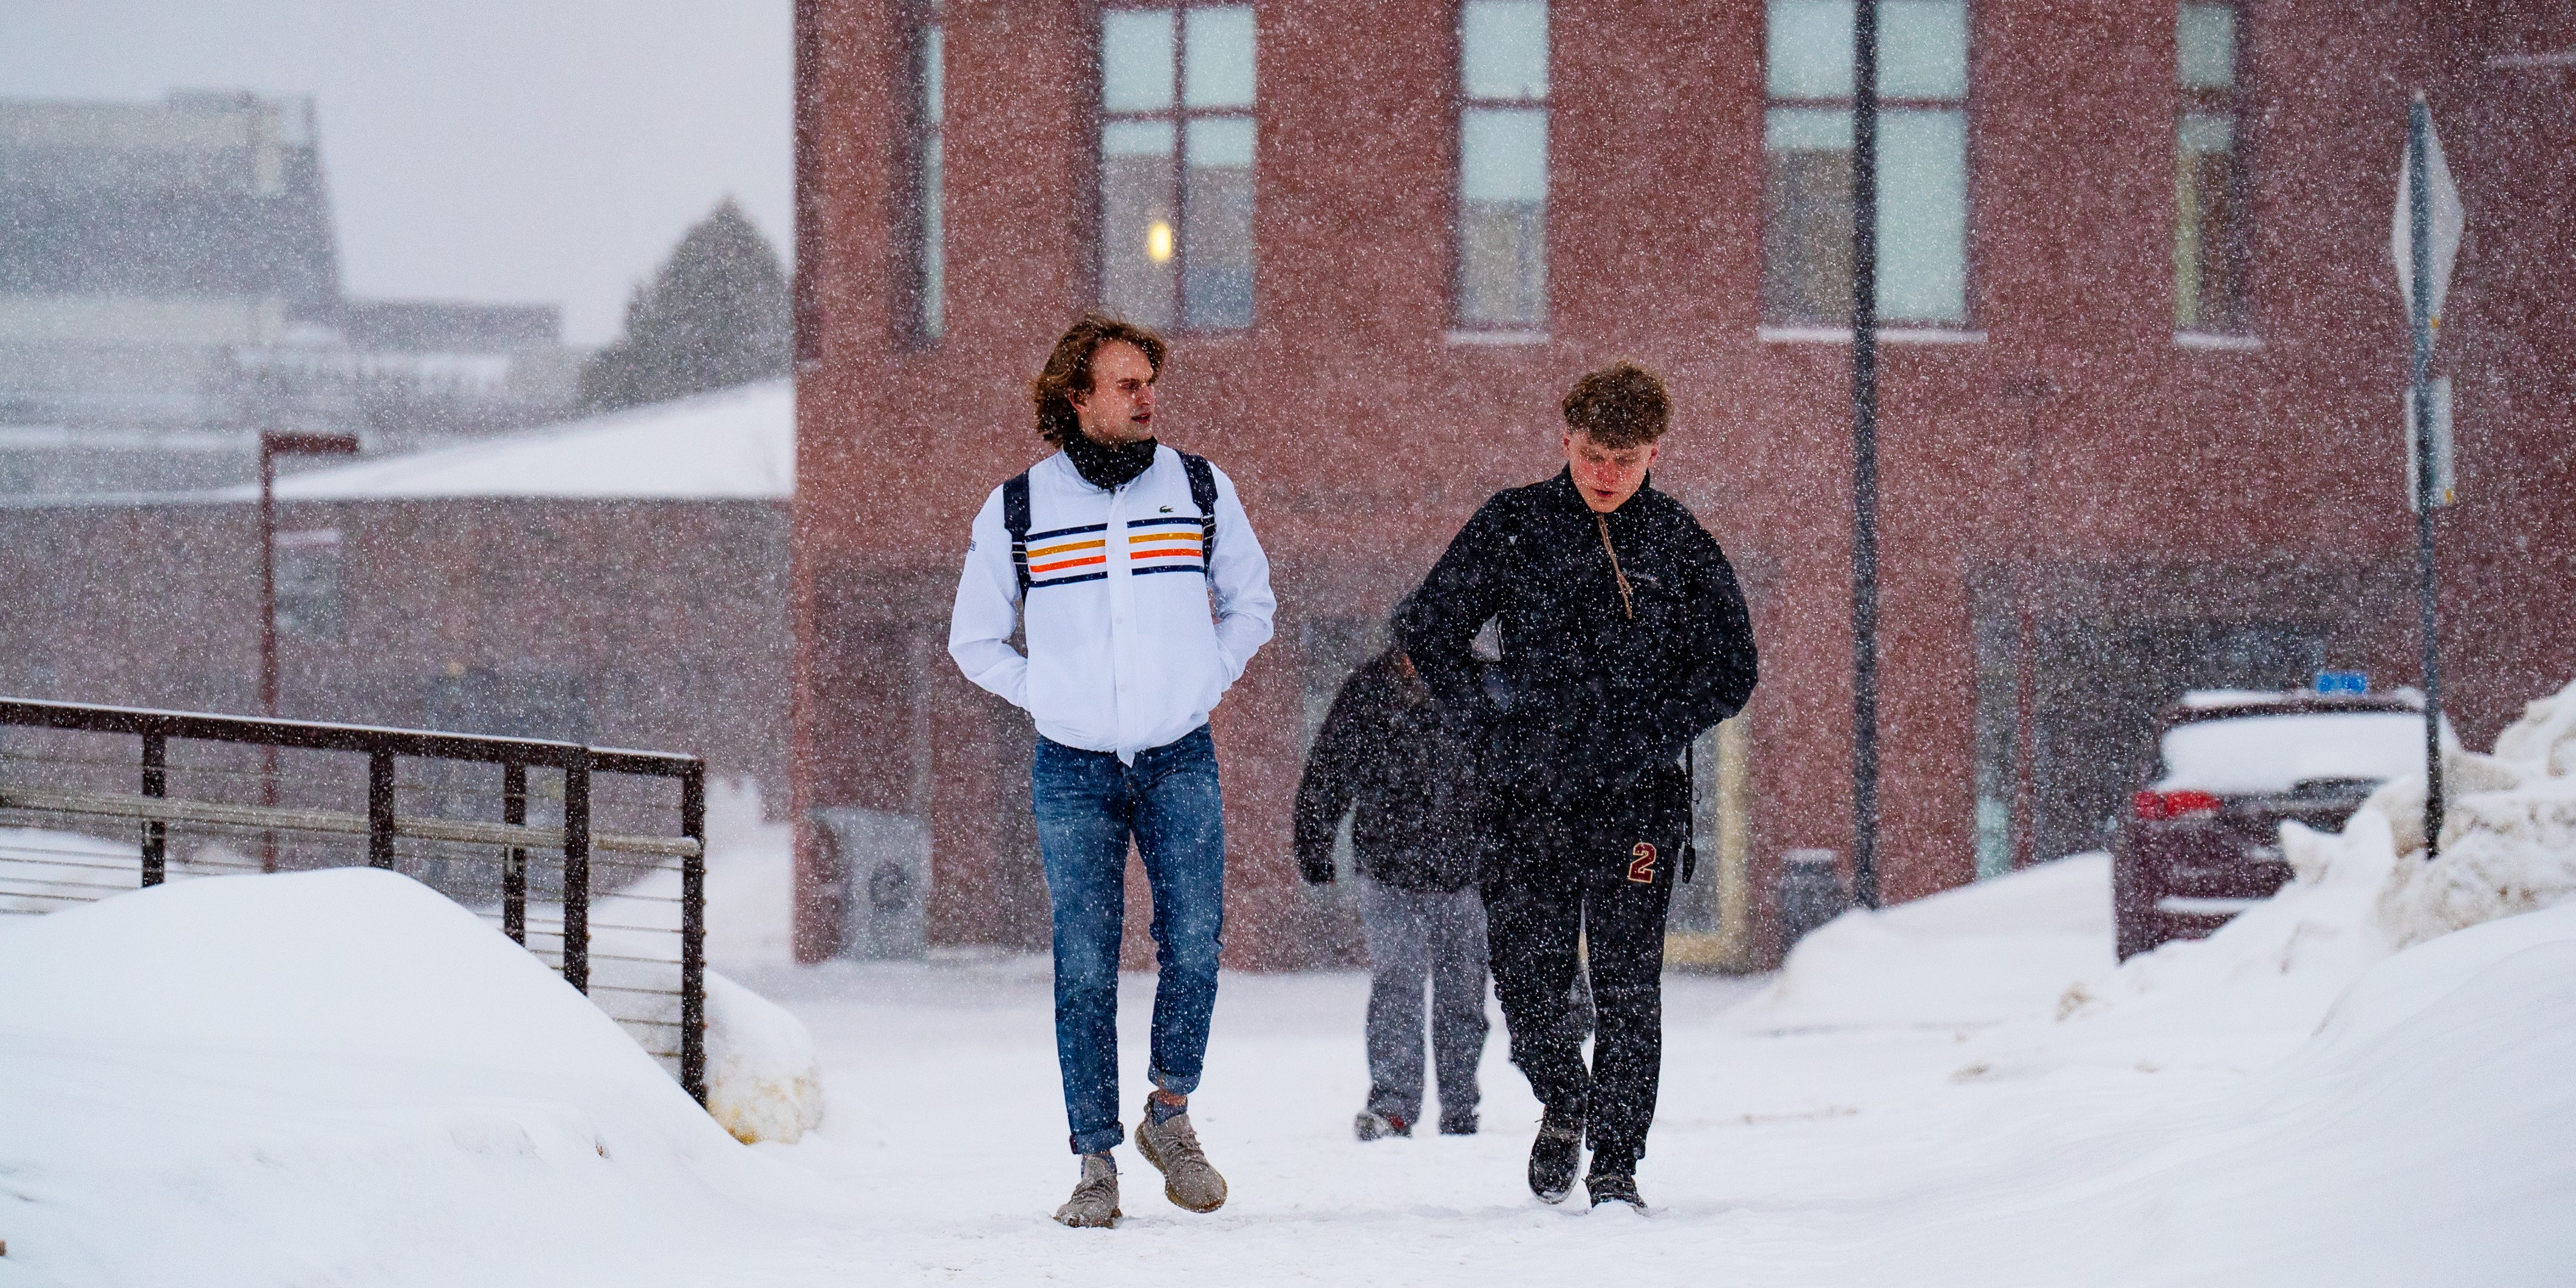 Two students walk across a very snowy campus wearing coats